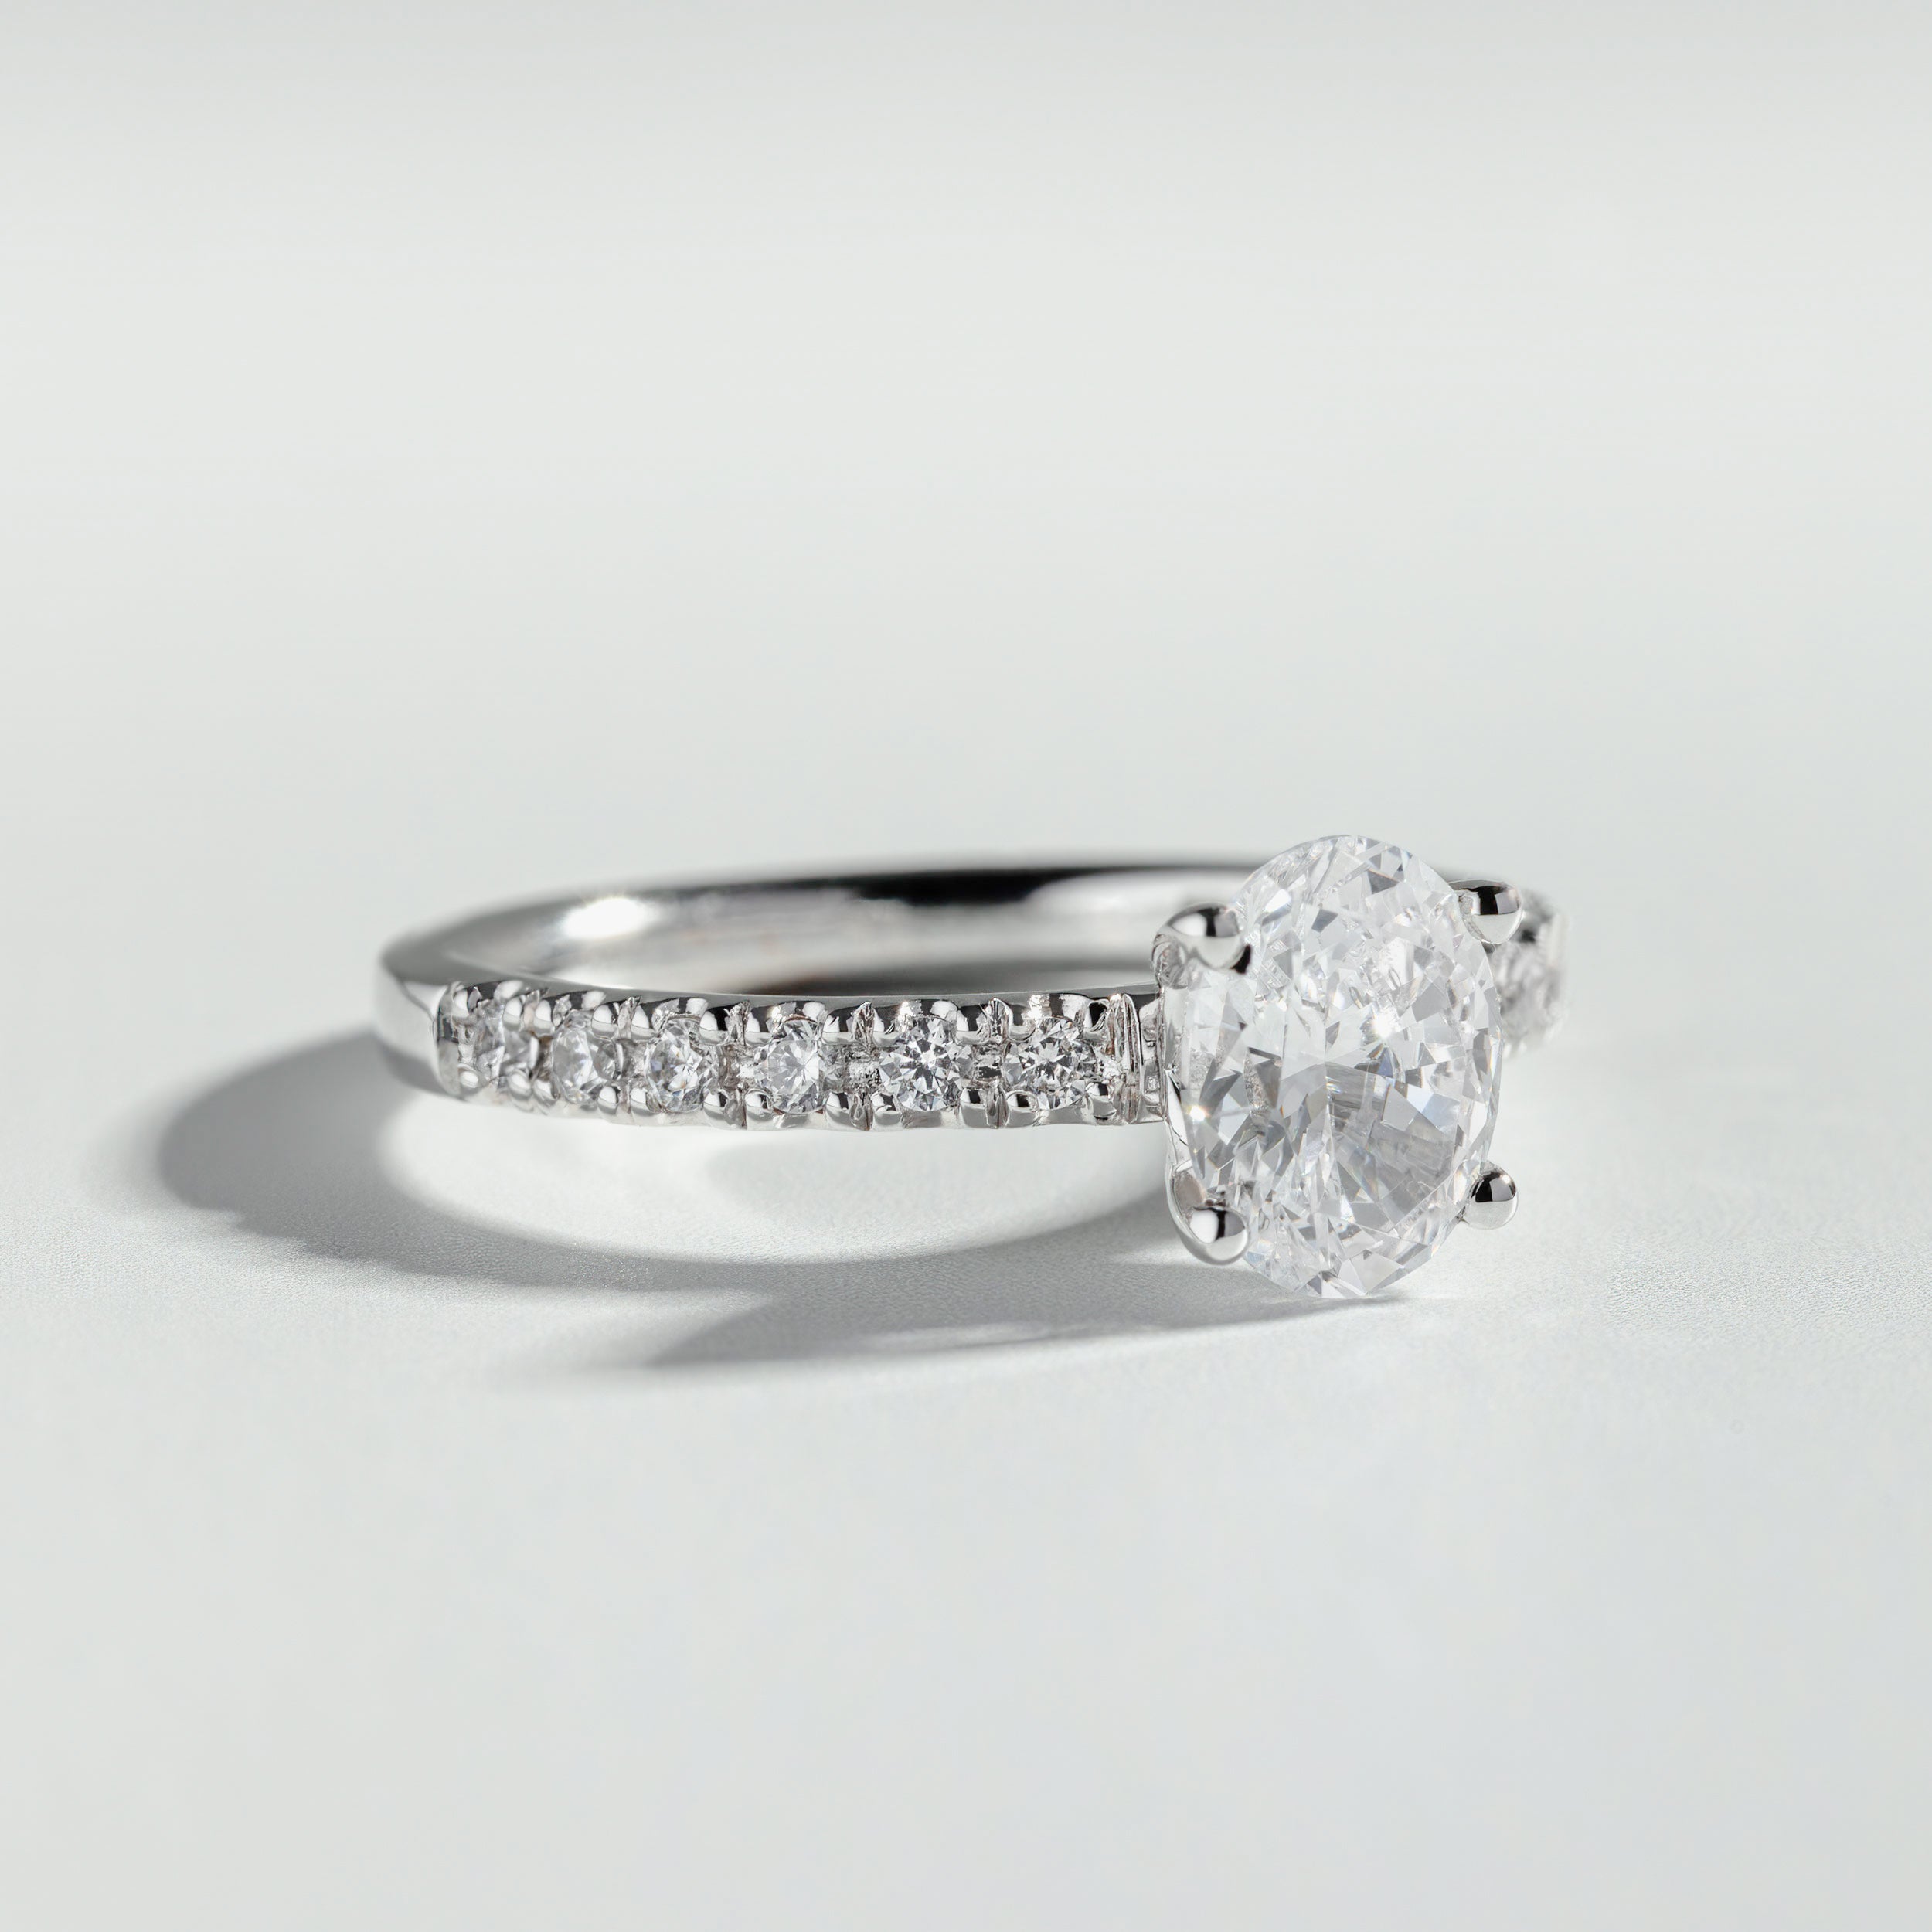 The Round Cut Pavé Solitaire Ring